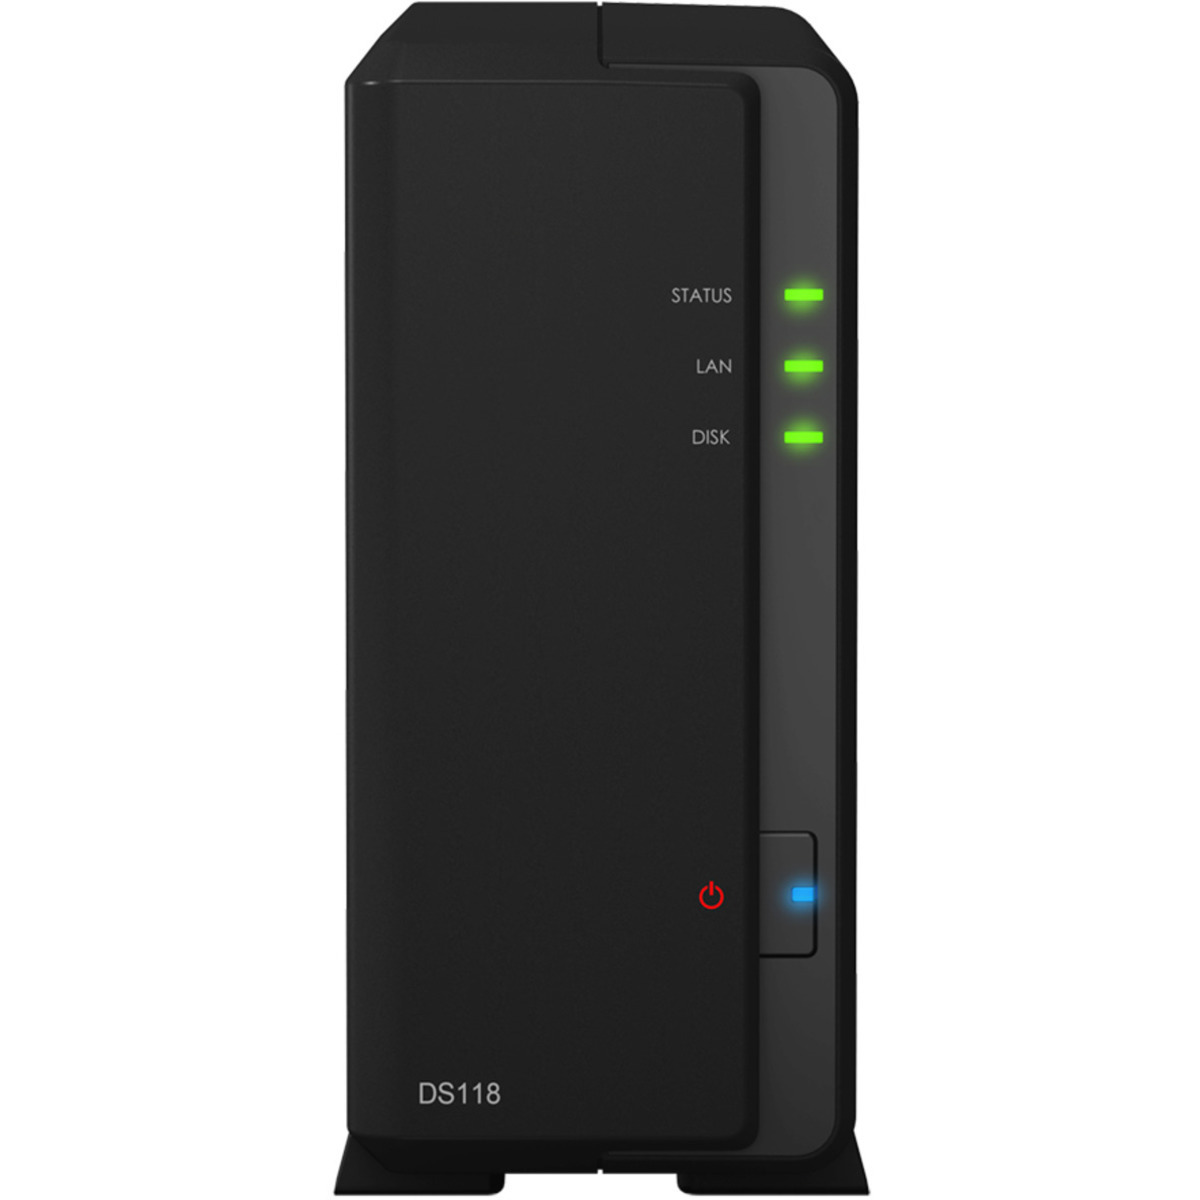 buy $576 Synology DiskStation DS118 16tb Desktop NAS - Network Attached Storage Device 1x16000gb Toshiba Enterprise Capacity MG08ACA16TE 3.5 7200rpm SATA 6Gb/s HDD ENTERPRISE Class Drives Installed - Burn-In Tested - nas headquarters buy network attached storage server device das new raid-5 free shipping usa DiskStation DS118